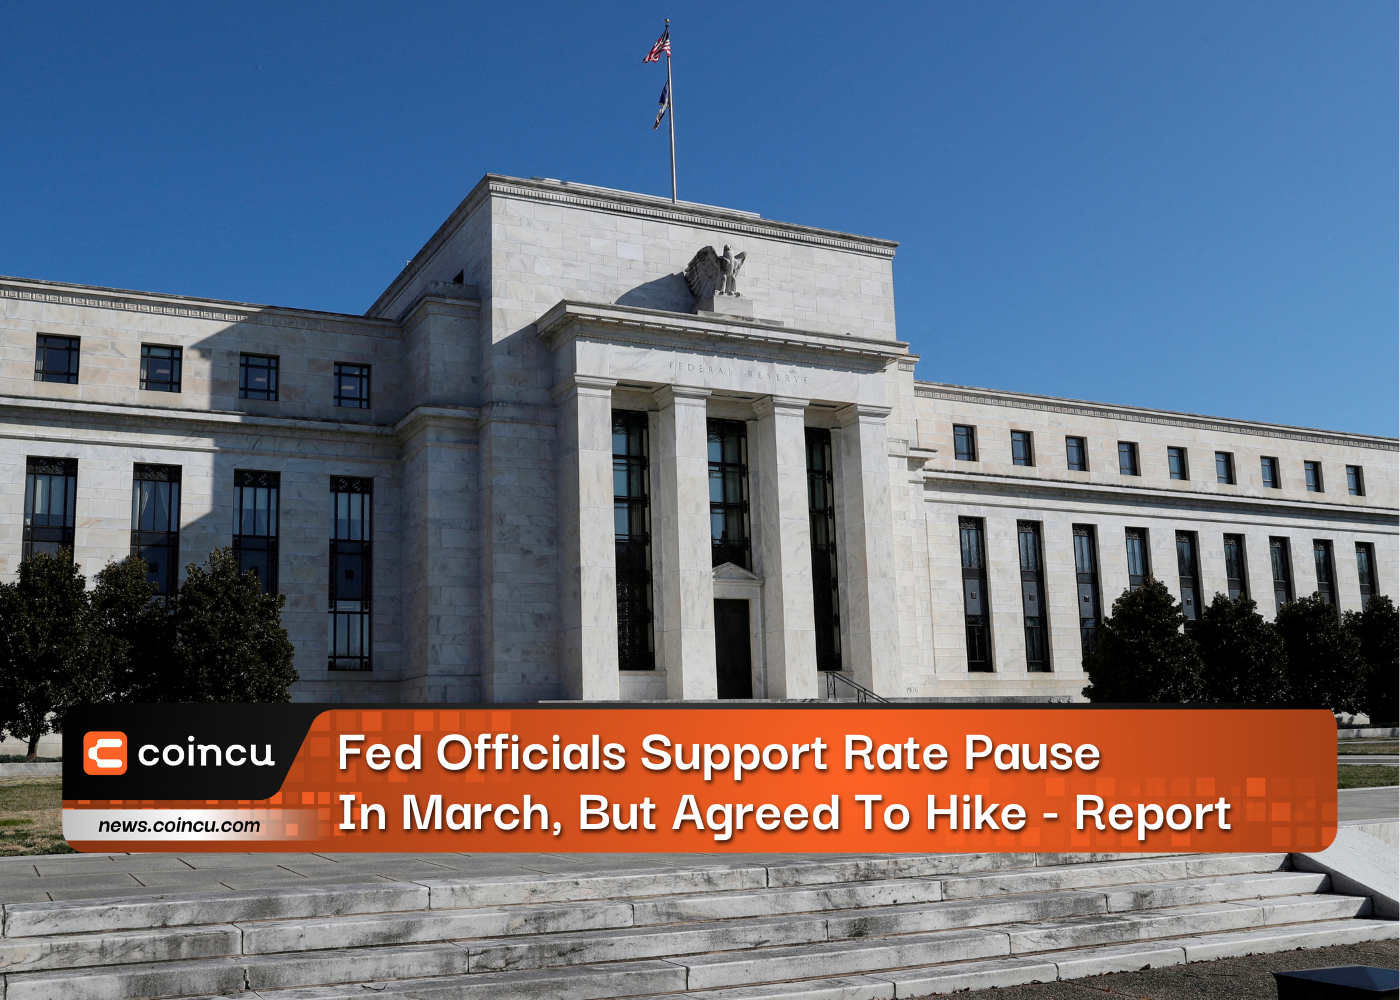 Fed Officials Support Rate Pause In March, But Agreed To Hike - Report